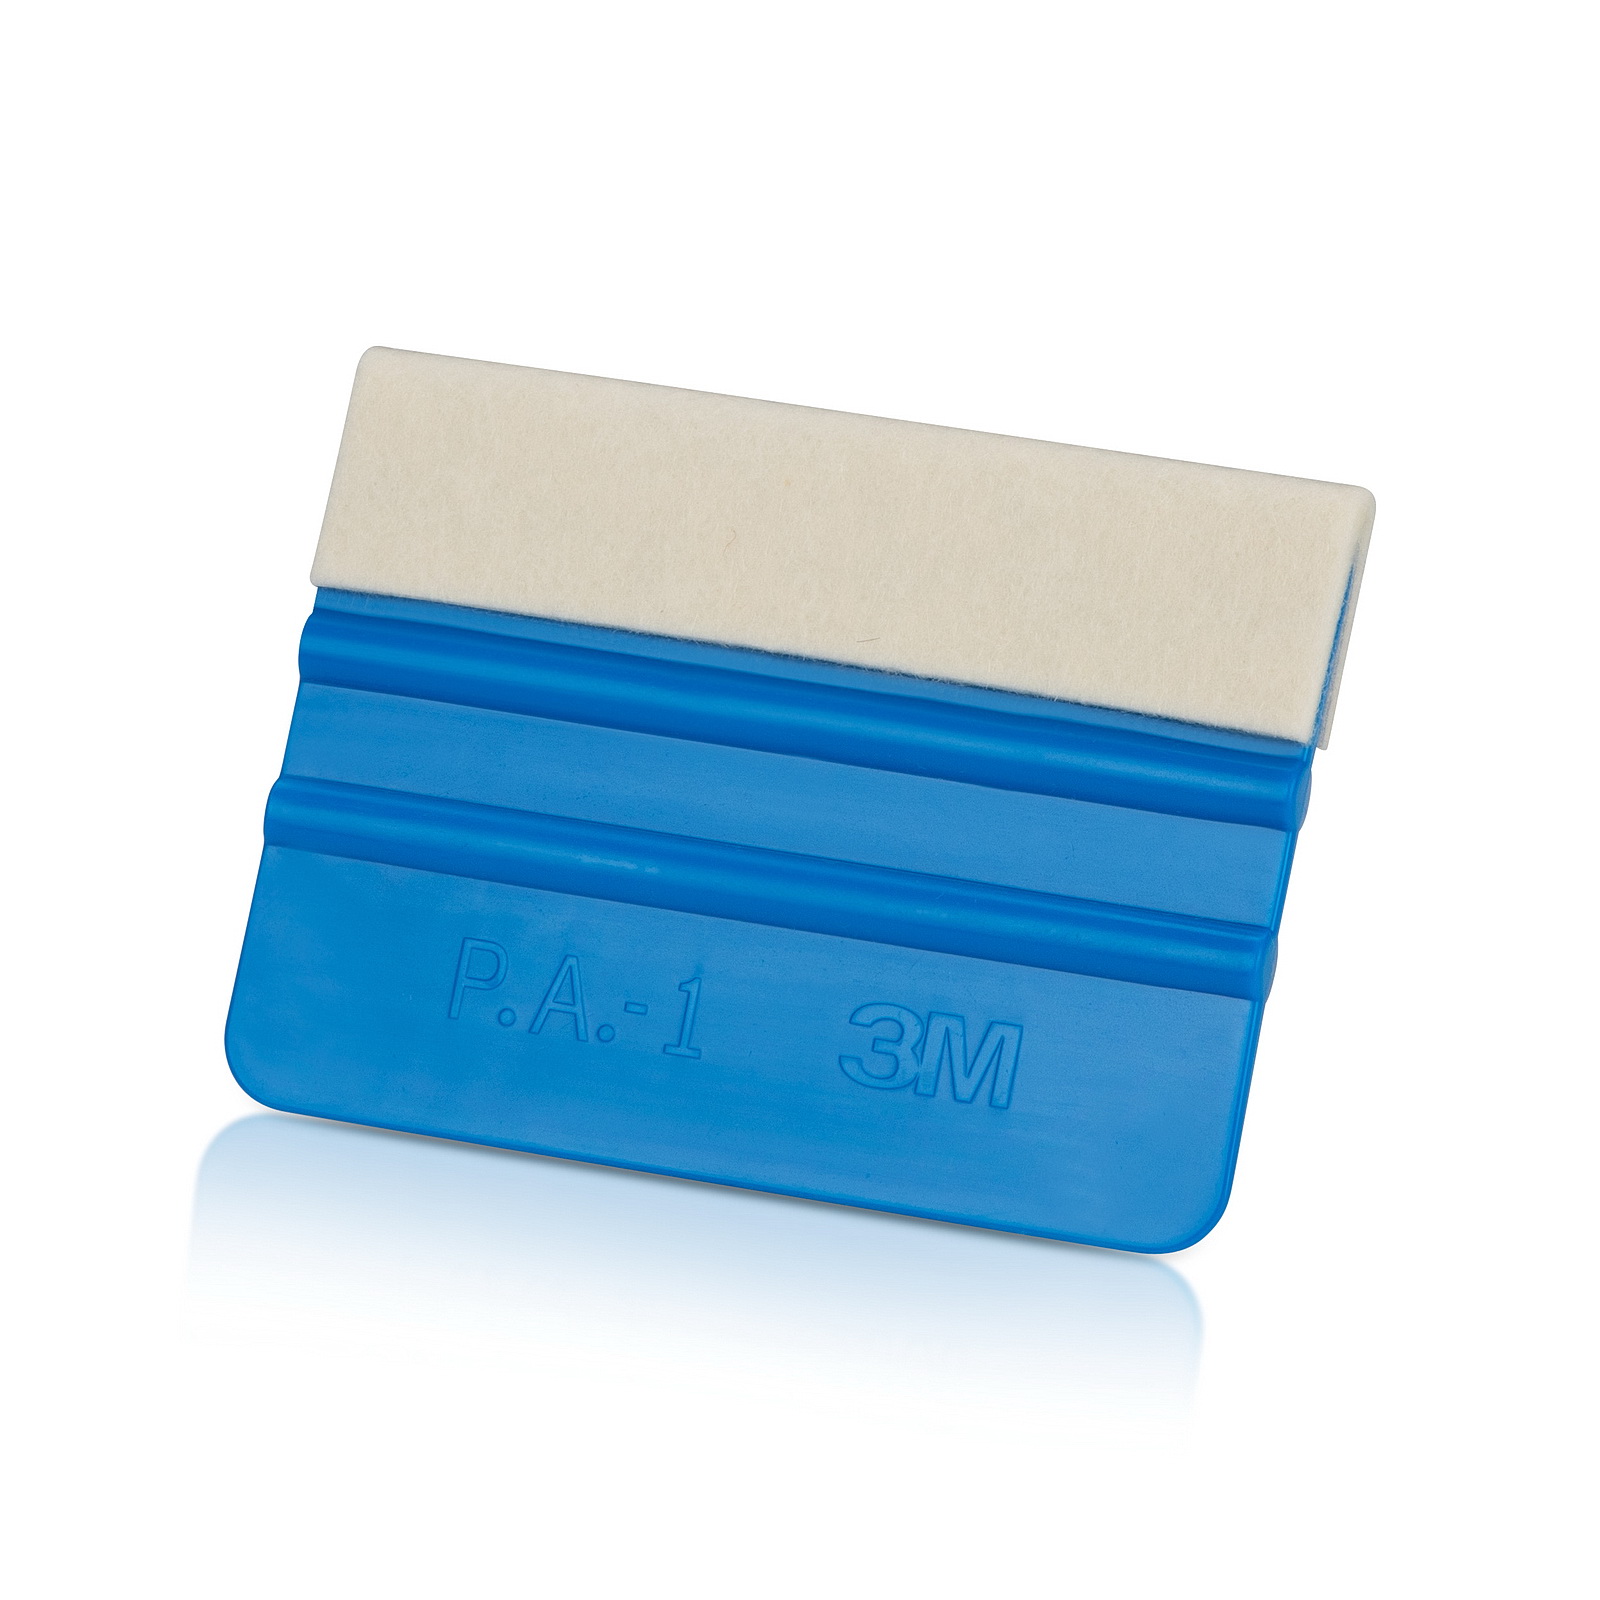 3M 4'' x 3'' Blue Squeegee, Medium Hardness, with White Wool Felt for Vinyl  and Film Application